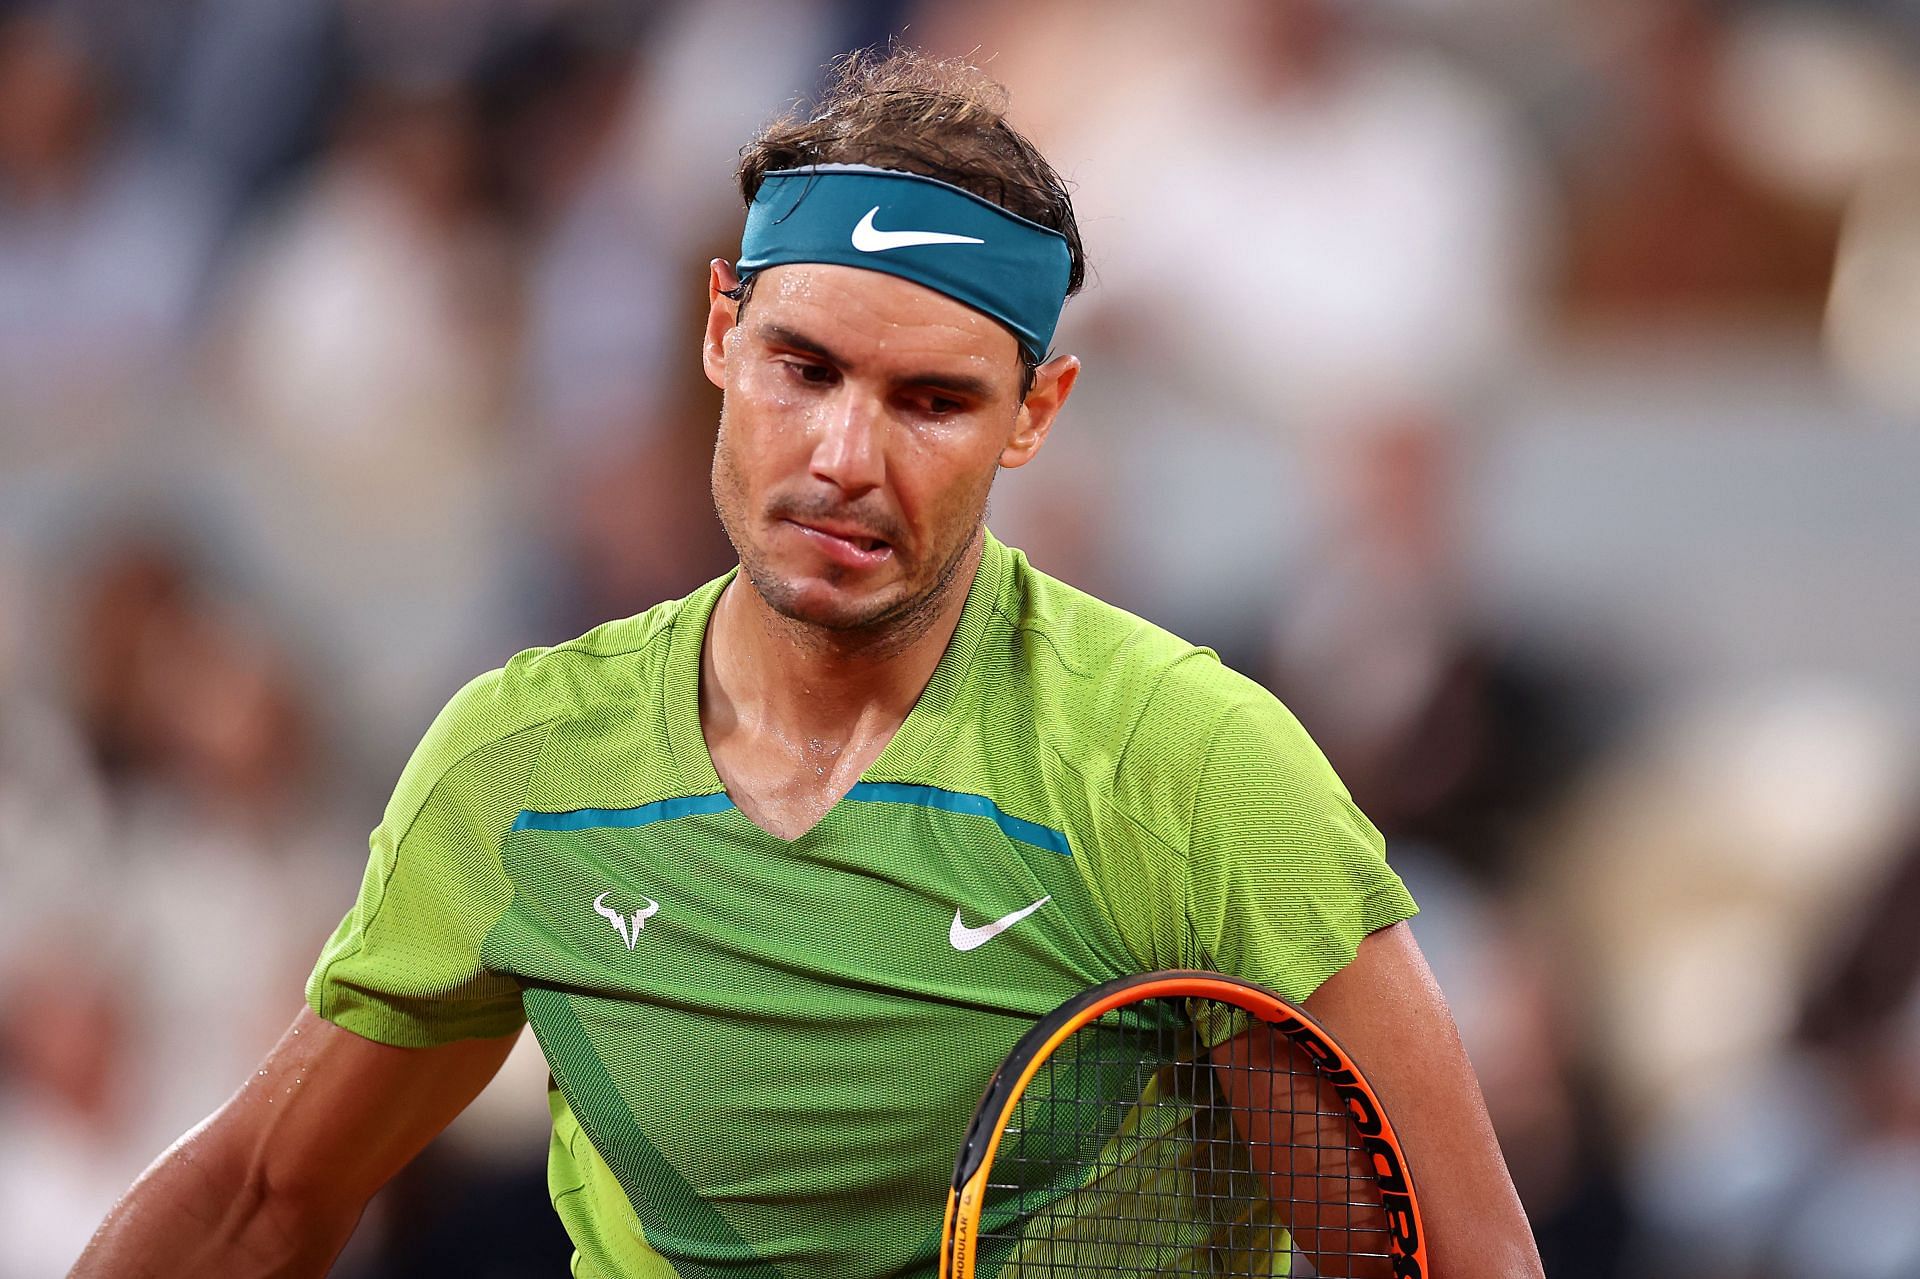 Rafael Nadal takes on either Casper Ruud or Marin Cilic in the final of the 2022 French Open